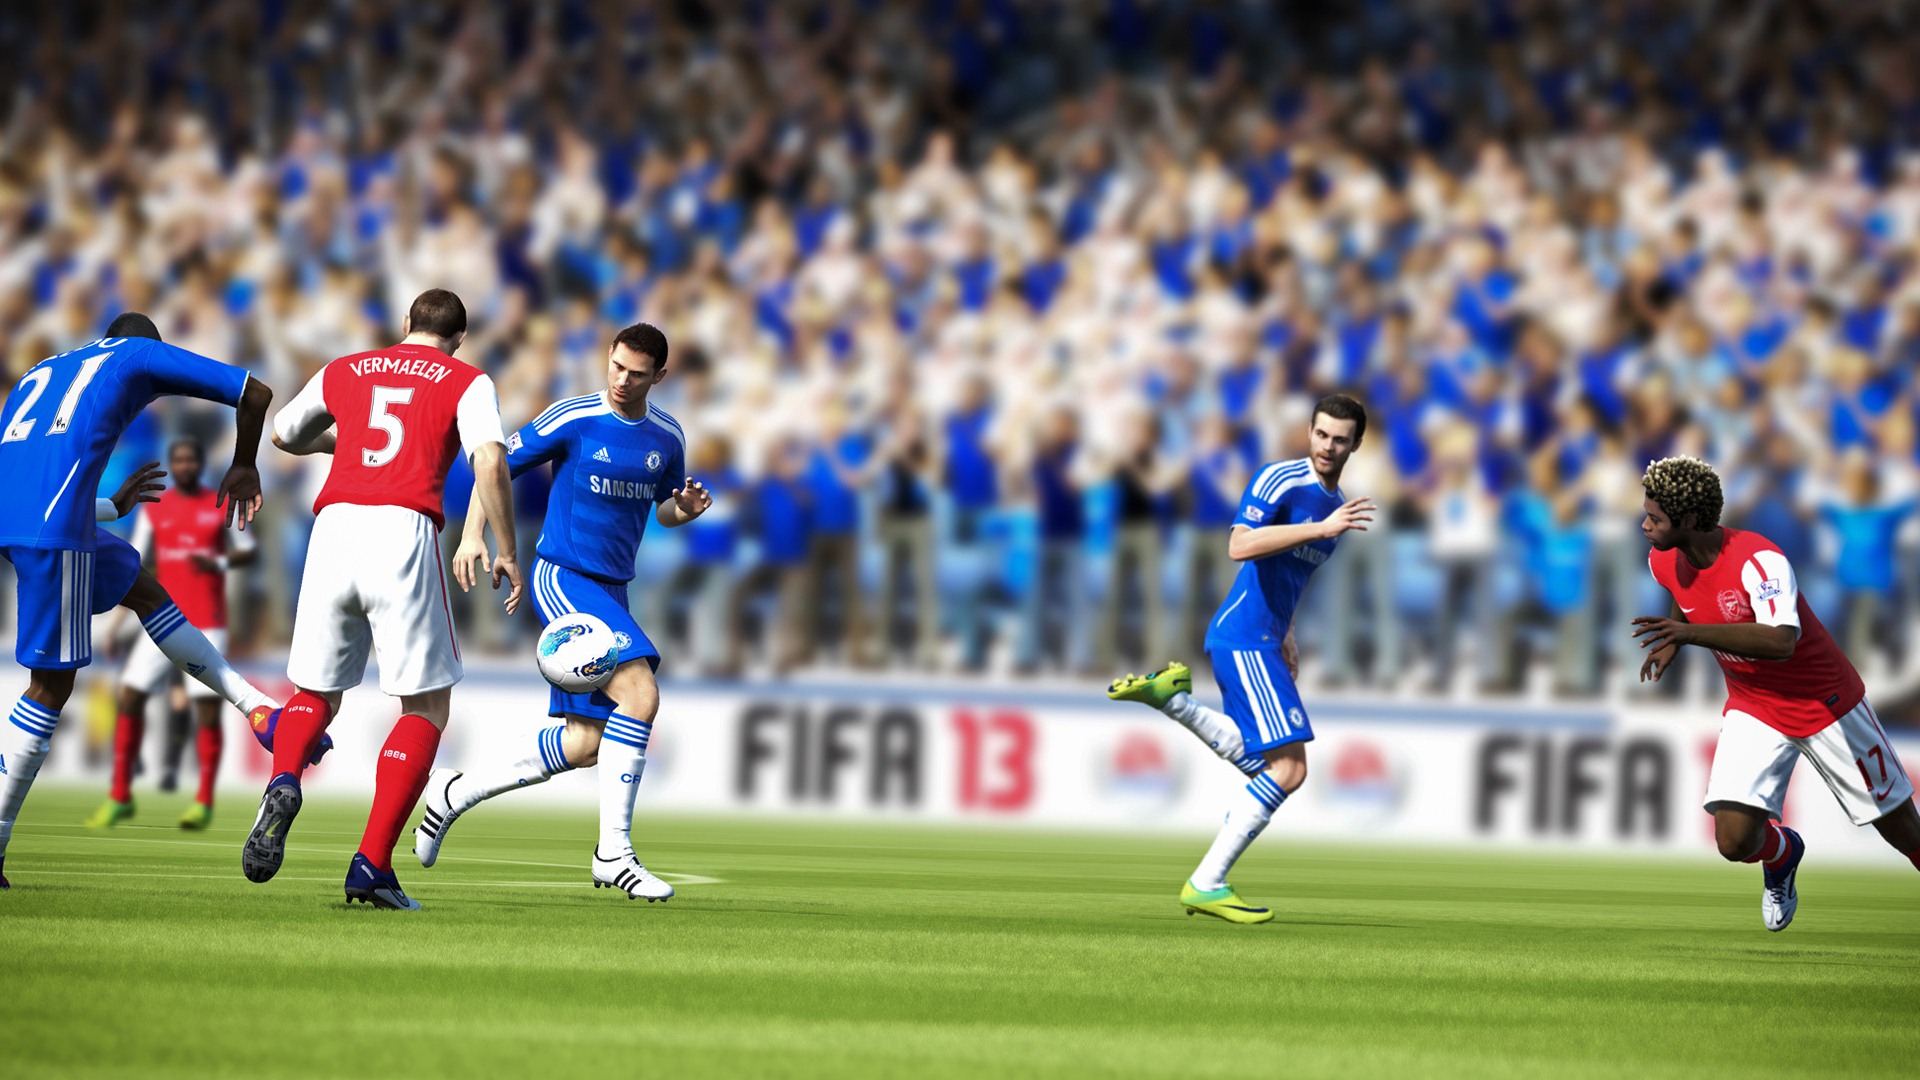 FIFA 13 game HD wallpapers #13 - 1920x1080